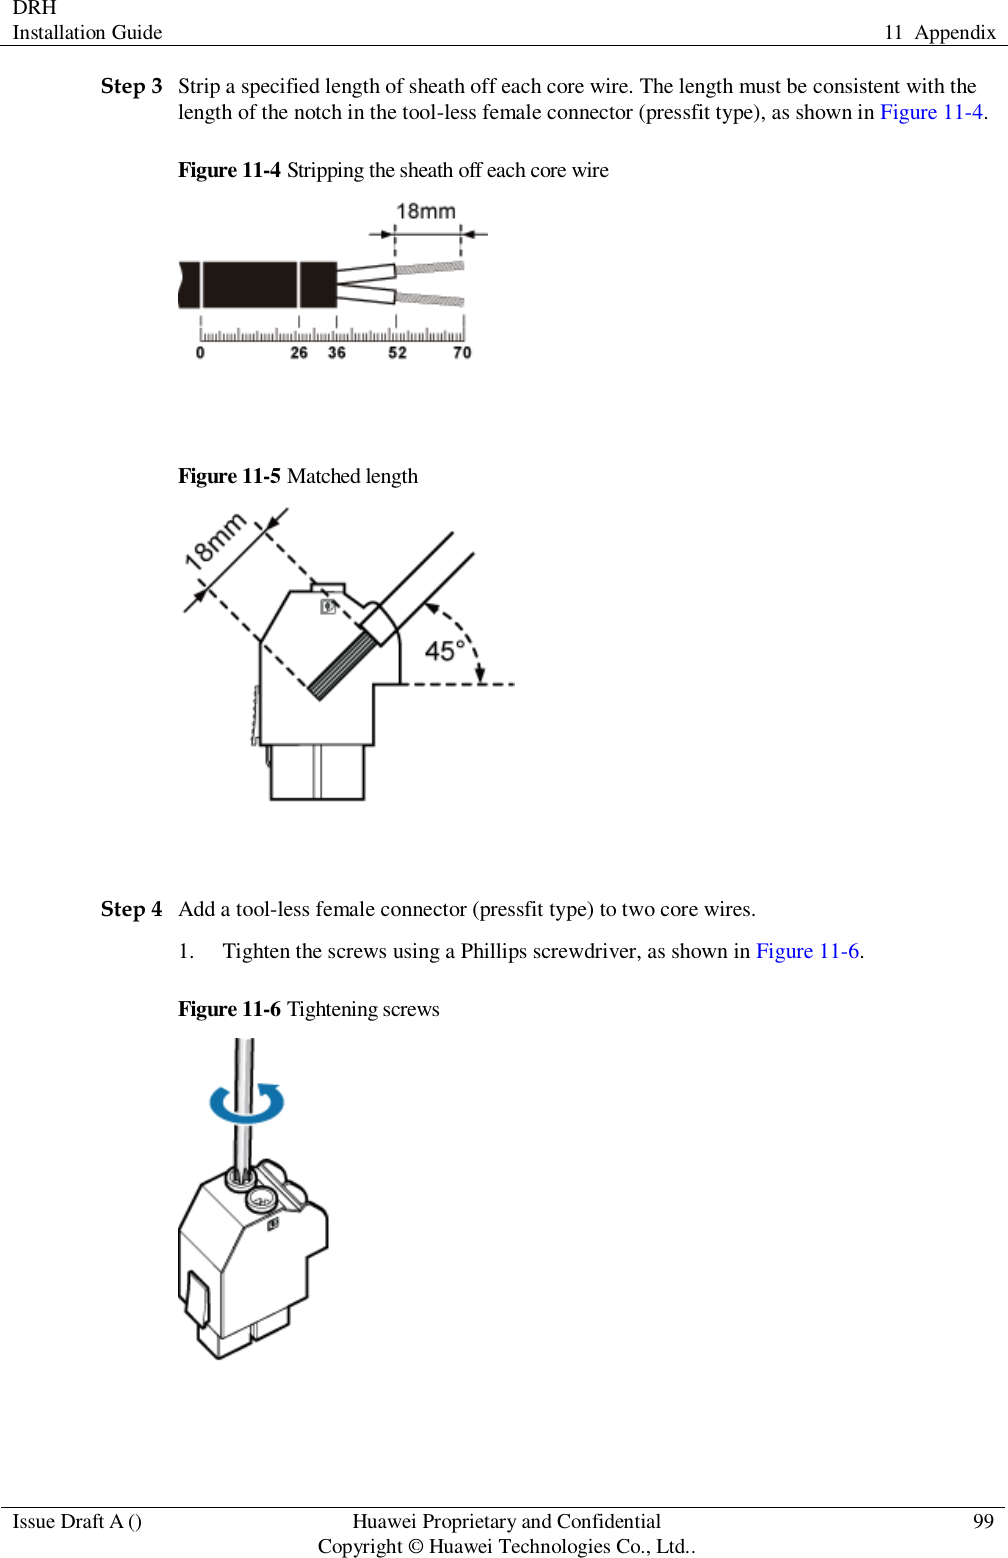 DRH   Installation Guide 11  Appendix  Issue Draft A () Huawei Proprietary and Confidential                                     Copyright © Huawei Technologies Co., Ltd.. 99  Step 3 Strip a specified length of sheath off each core wire. The length must be consistent with the length of the notch in the tool-less female connector (pressfit type), as shown in Figure 11-4. Figure 11-4 Stripping the sheath off each core wire   Figure 11-5 Matched length   Step 4 Add a tool-less female connector (pressfit type) to two core wires. 1. Tighten the screws using a Phillips screwdriver, as shown in Figure 11-6. Figure 11-6 Tightening screws   